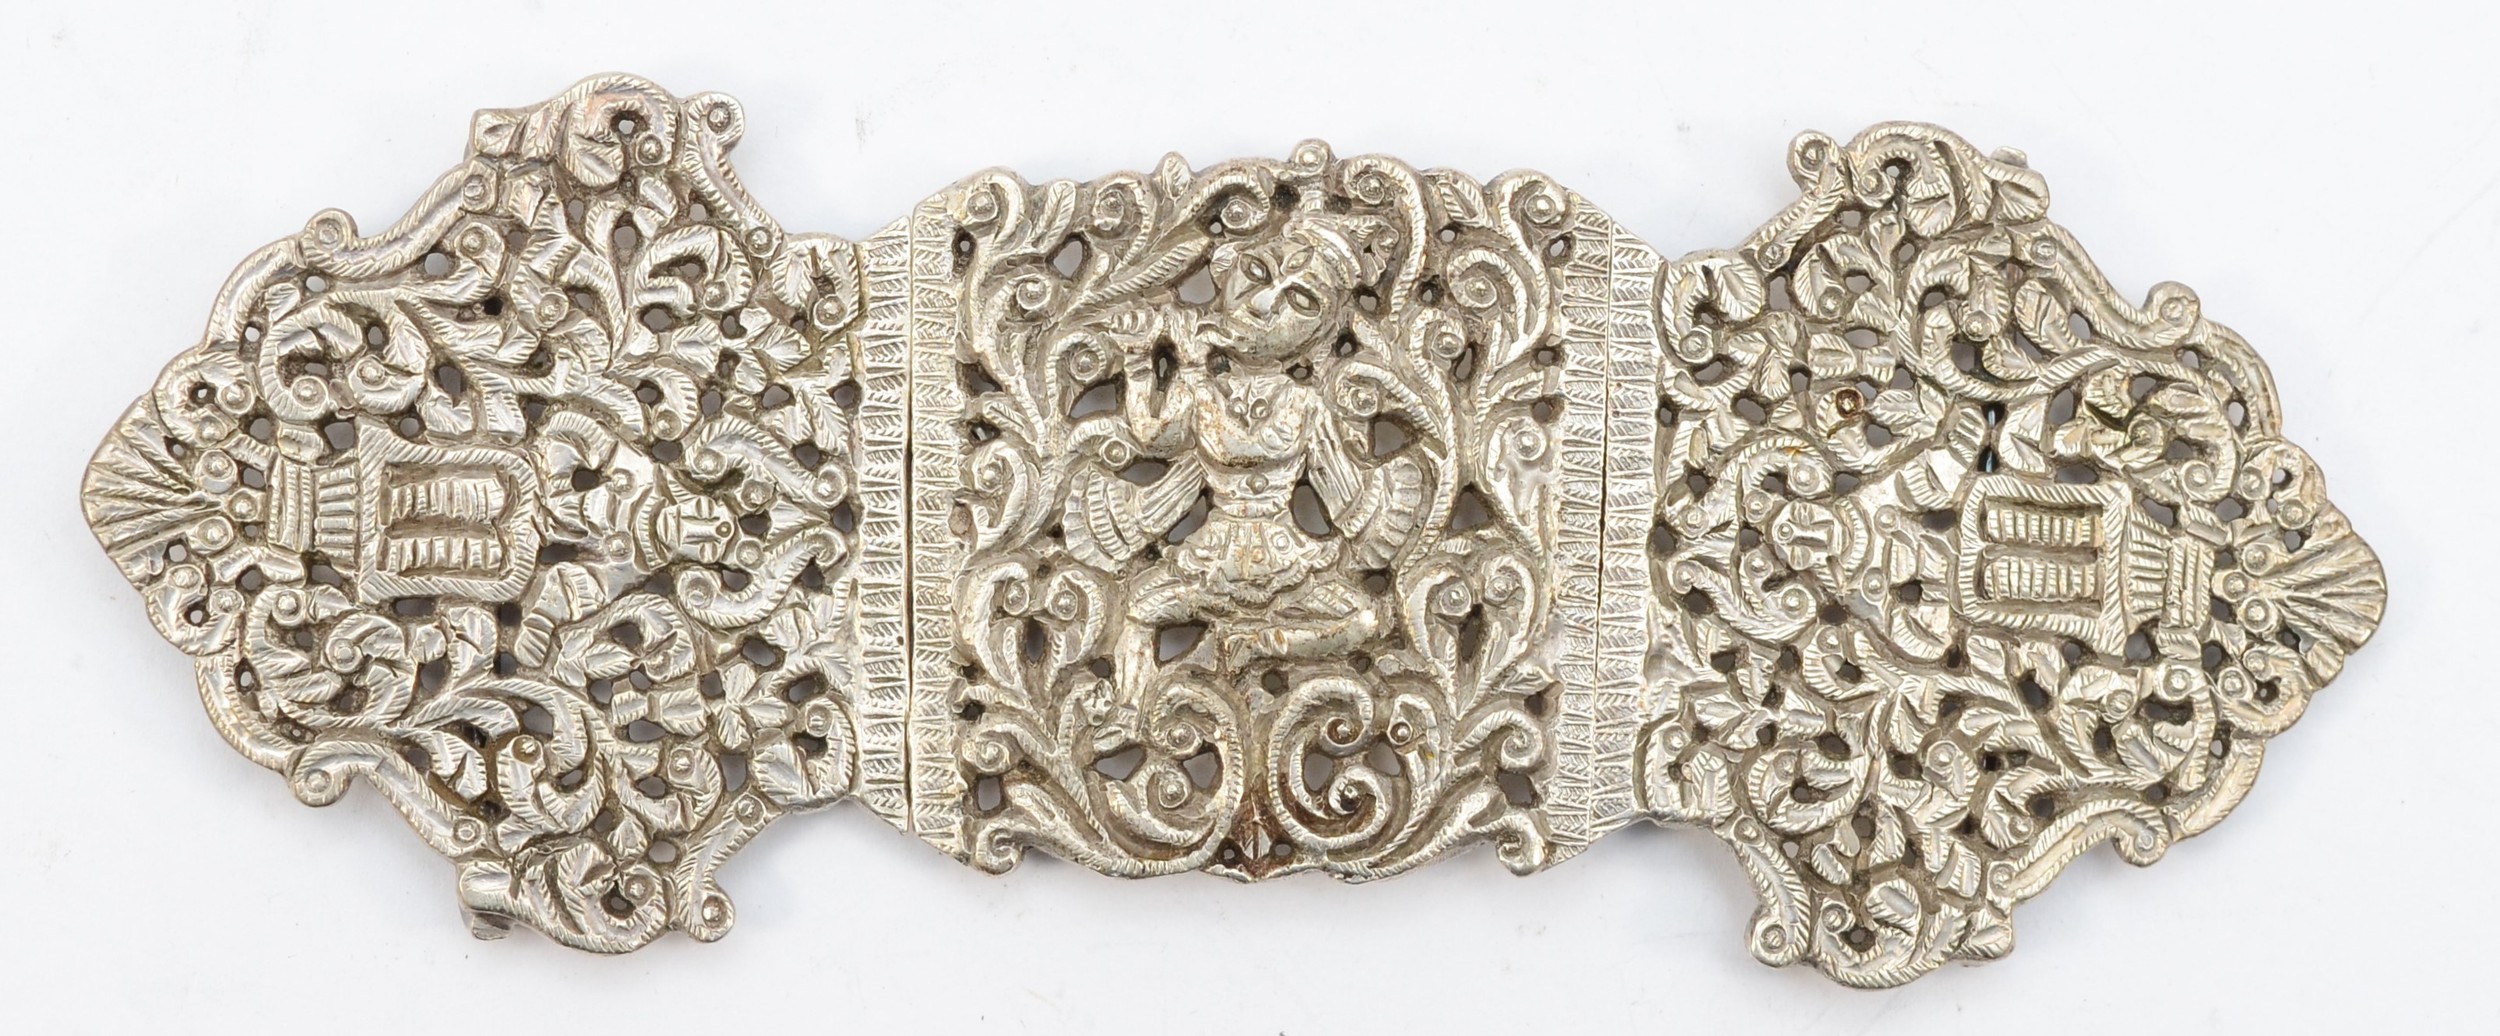 An Indian unmarked silver three section belt buckle with religious deity decoration, 14.5 x 5.5cm,